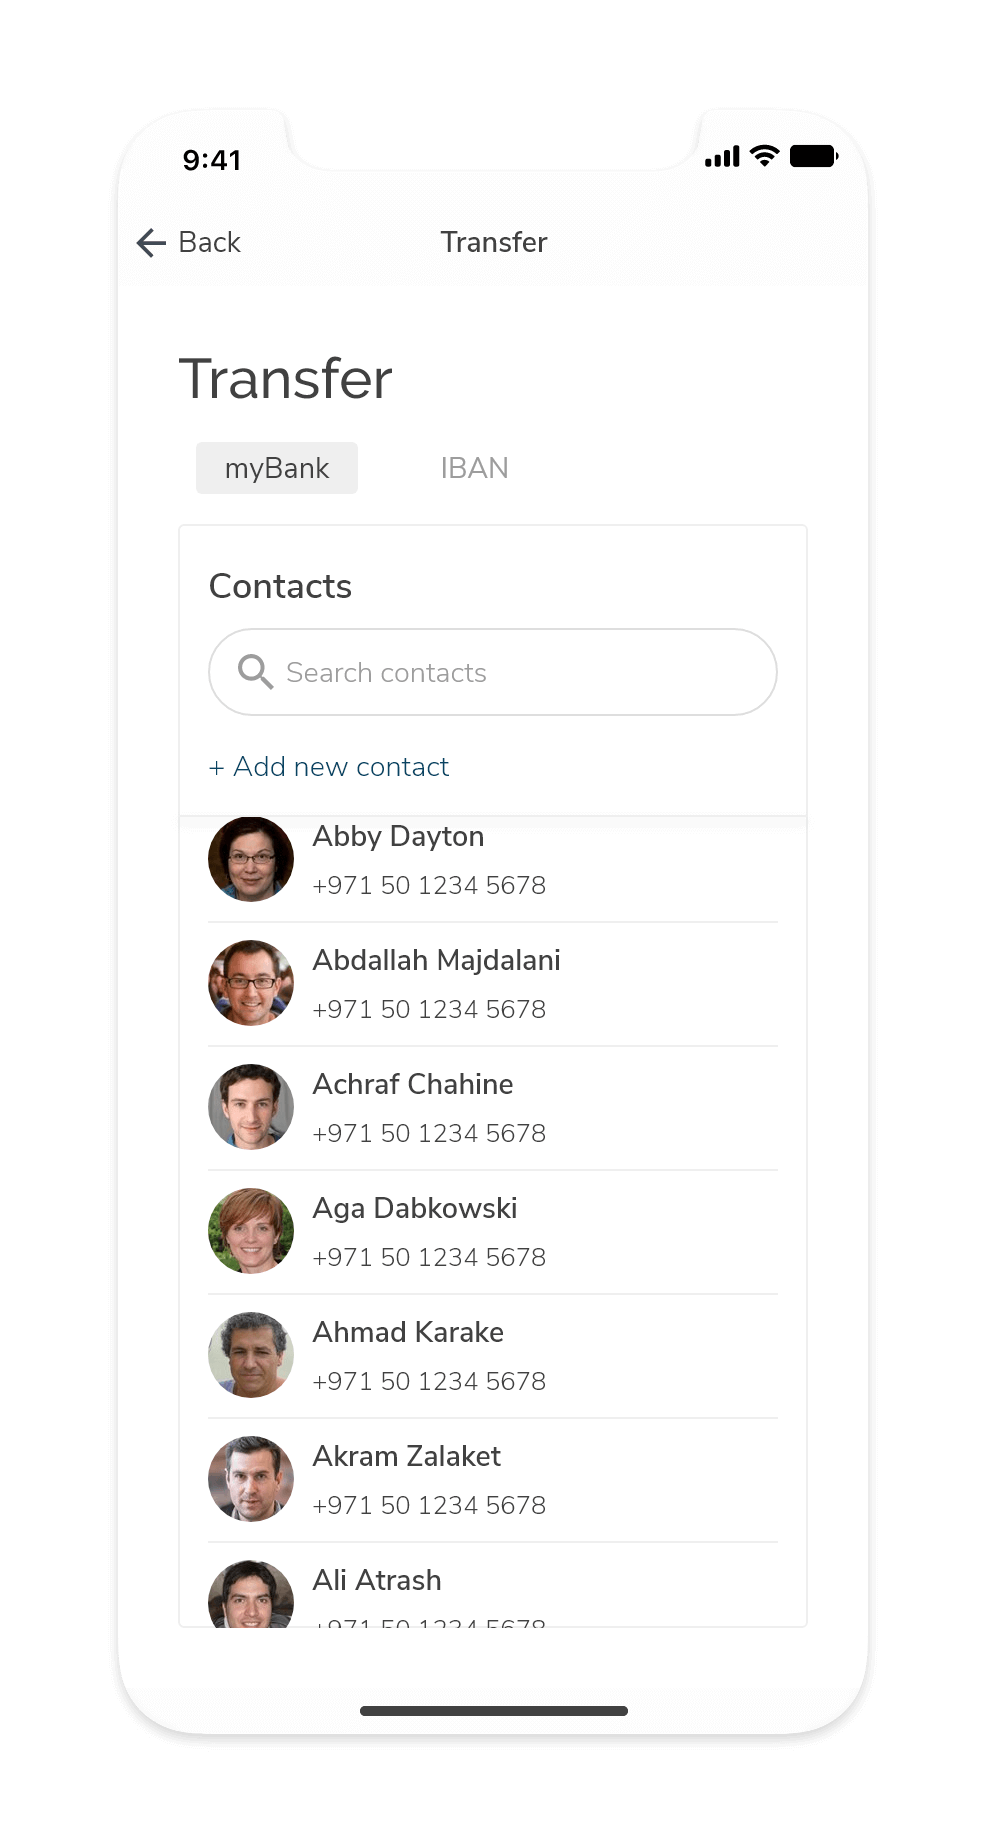 Screenshot of the Send Transfer page's contact list where users can send transfers to contacts using myBank, or through an IBAN